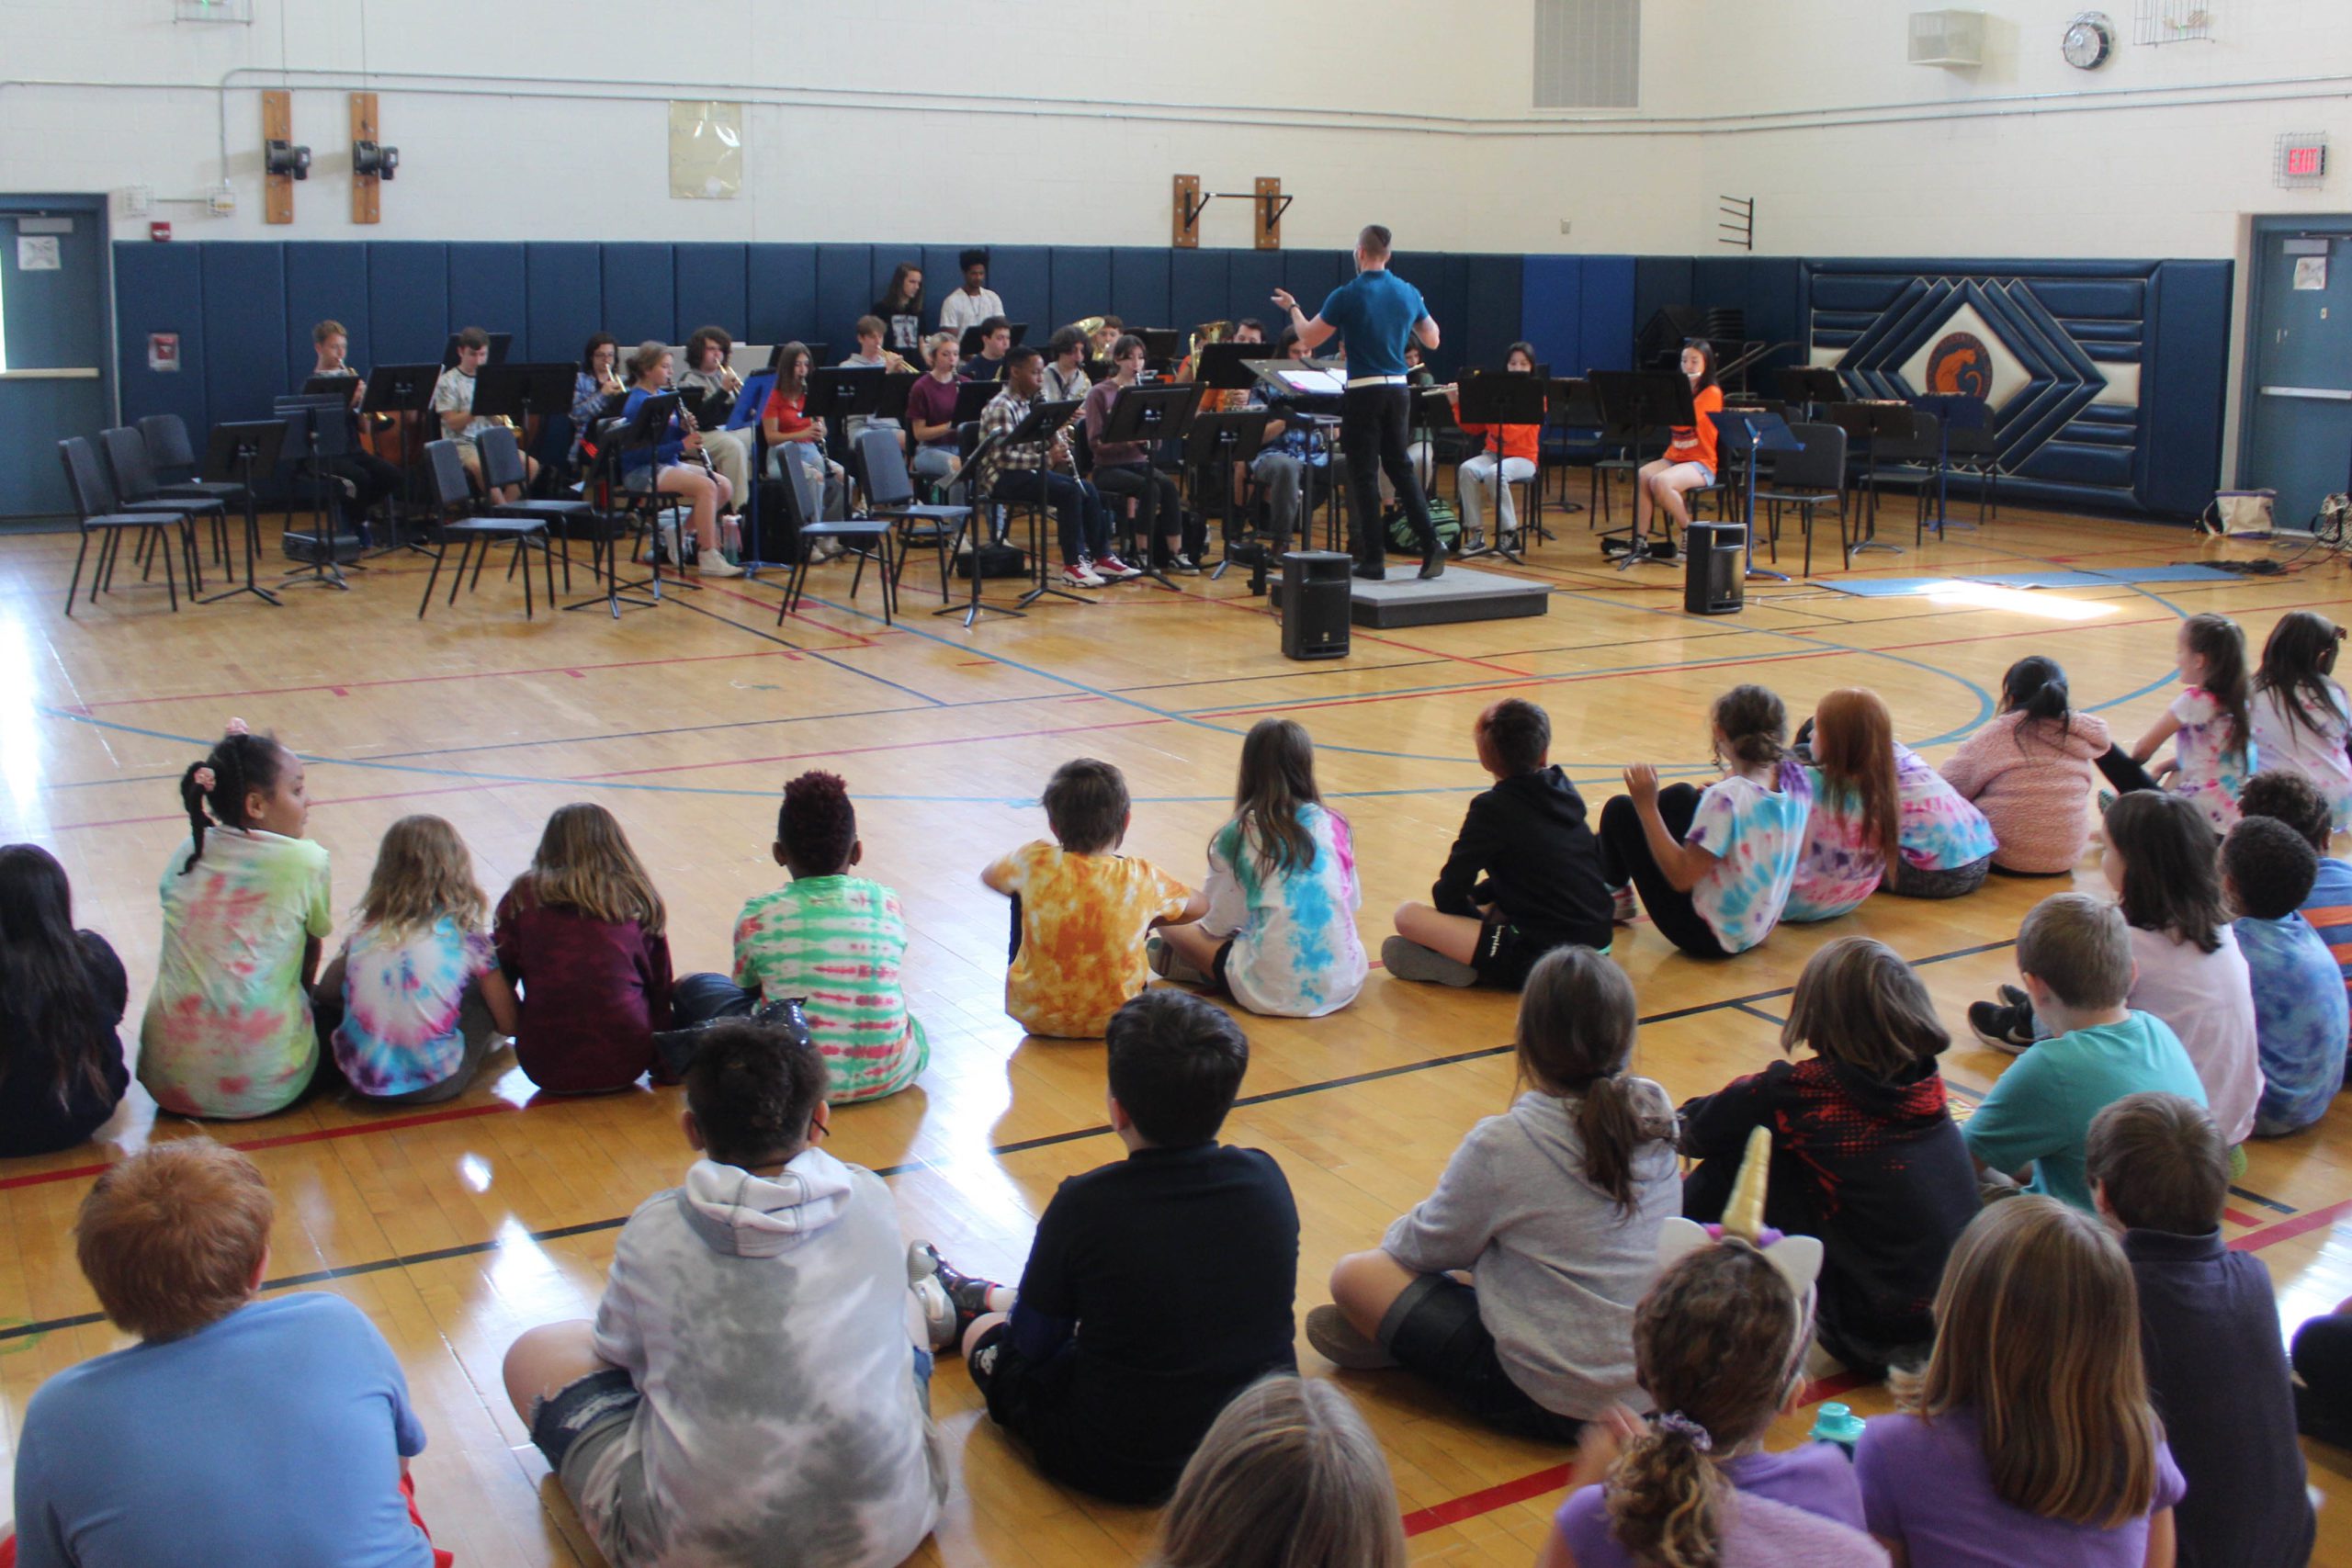 high school band playing in front of elementary students in gym